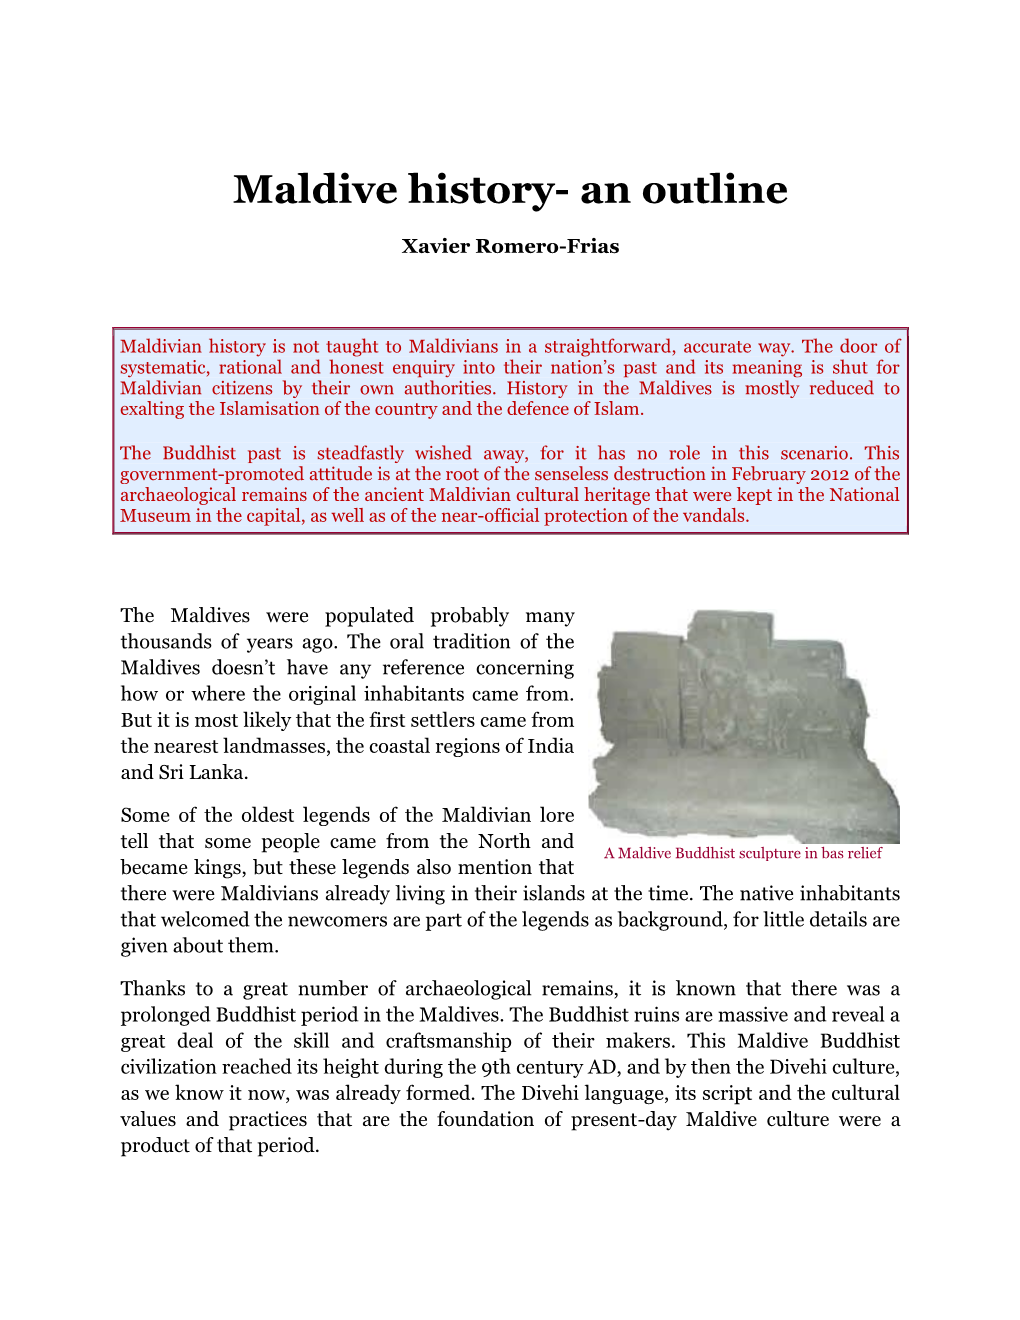 Maldive History- an Outline